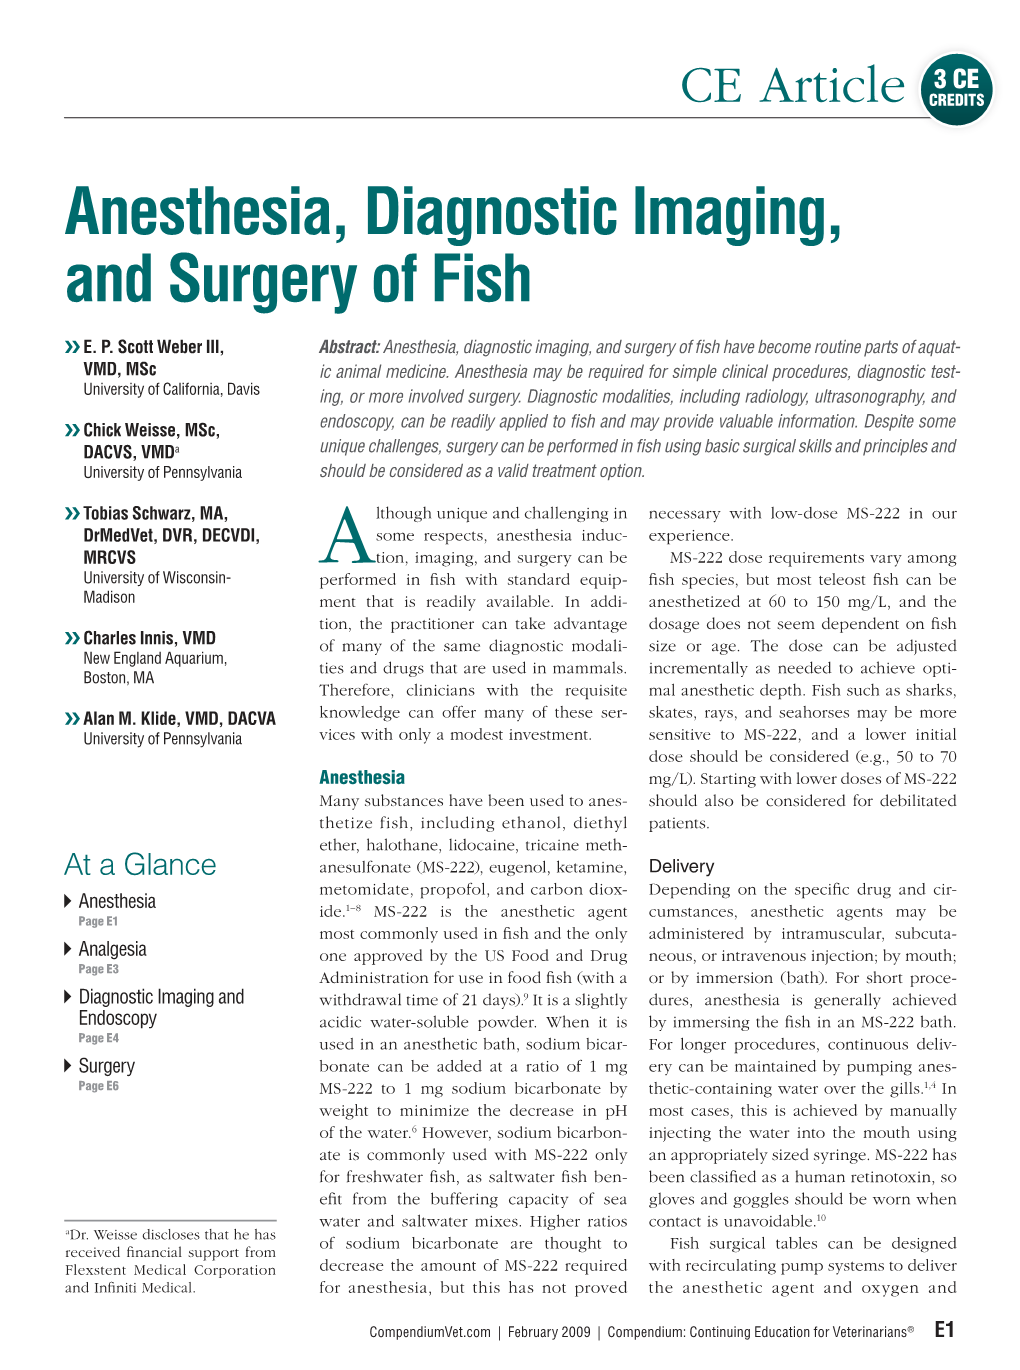 Anesthesia, Diagnostic Imaging, and Surgery of Fish